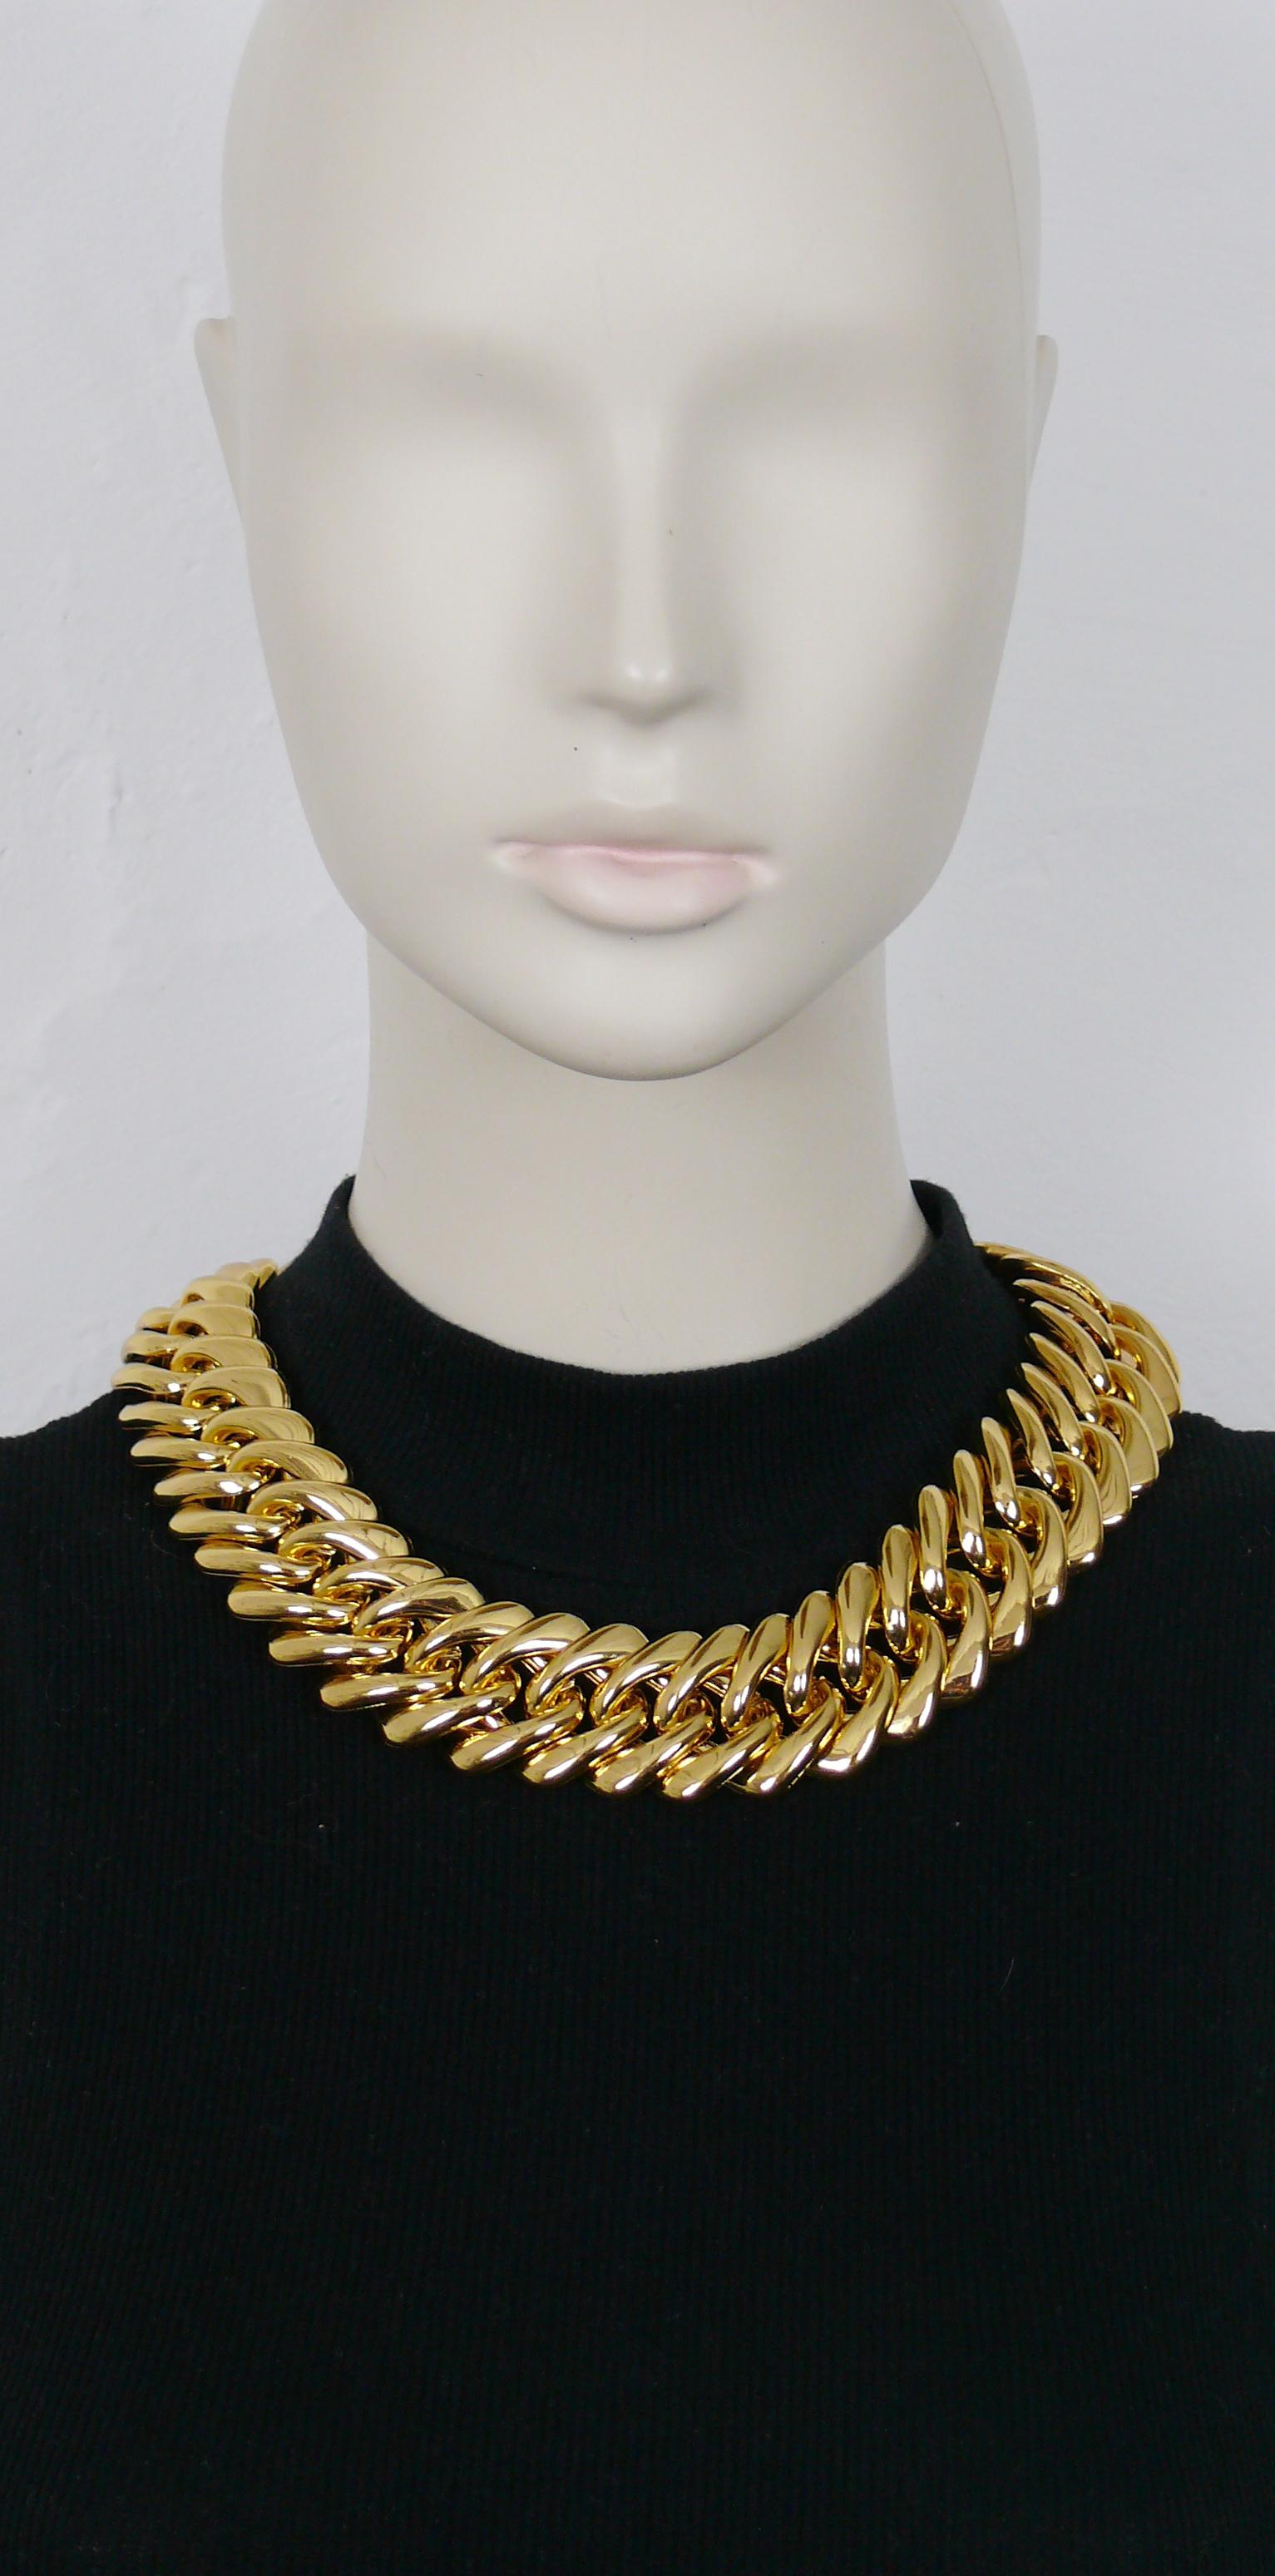 YVES SAINT LAURENT vintage iconic gold toned curb chain necklace.

Hook clasp closure.

Embossed YSL Made in France.

Indicative measurements : length approx. 50.5 cm (19.88 inches) / width approx. 3 cm (1.18 inches).

NOTES
- This is a preloved